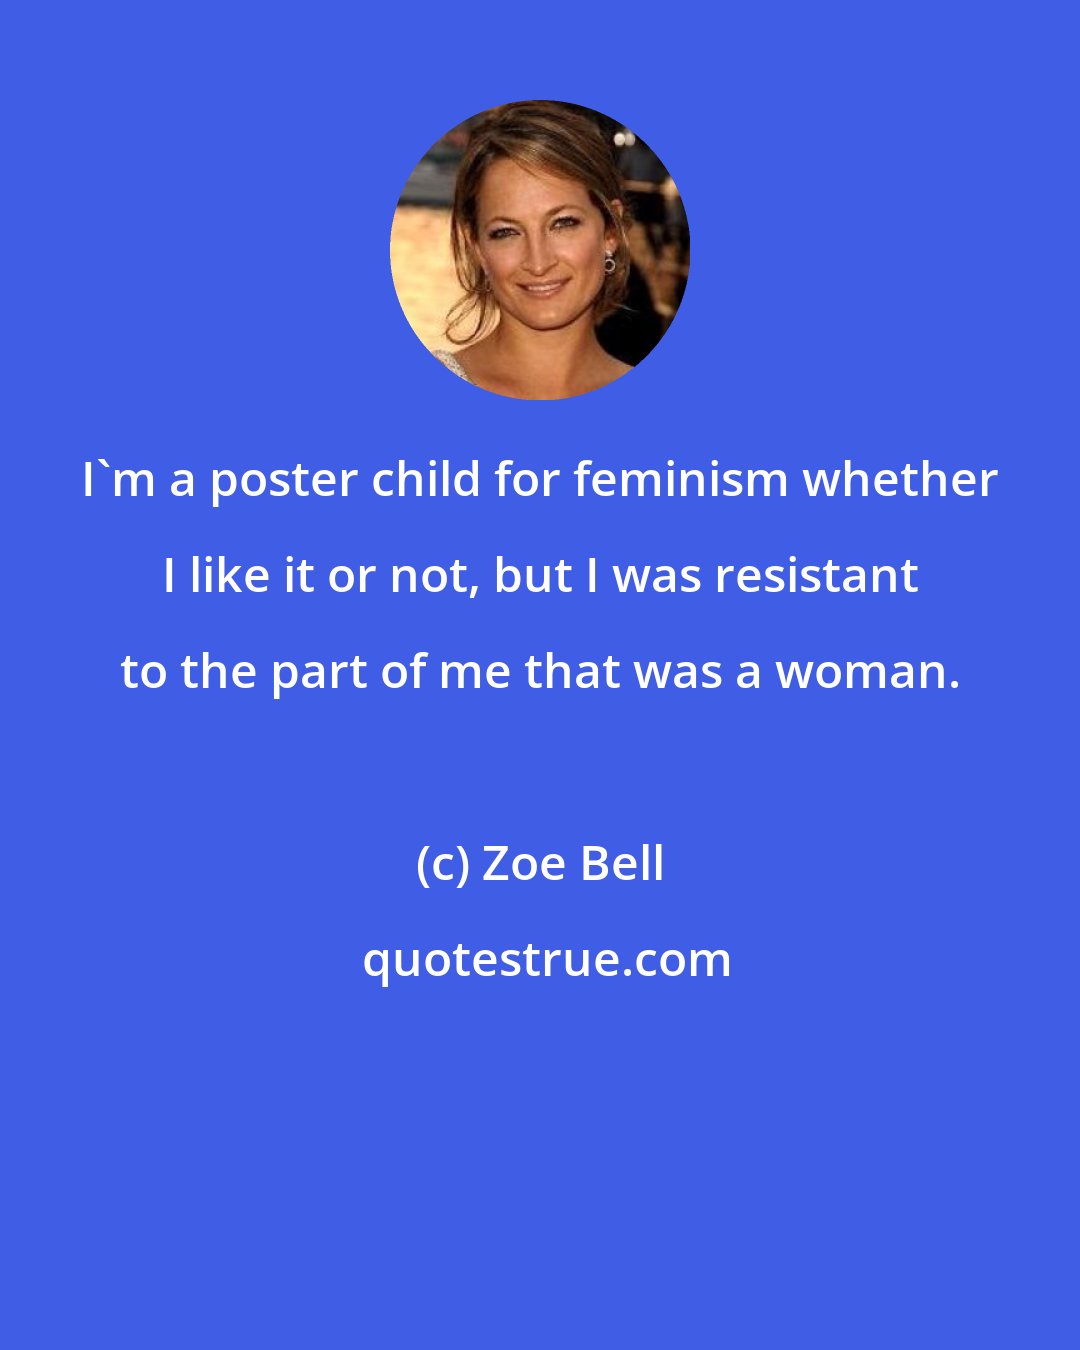 Zoe Bell: I'm a poster child for feminism whether I like it or not, but I was resistant to the part of me that was a woman.